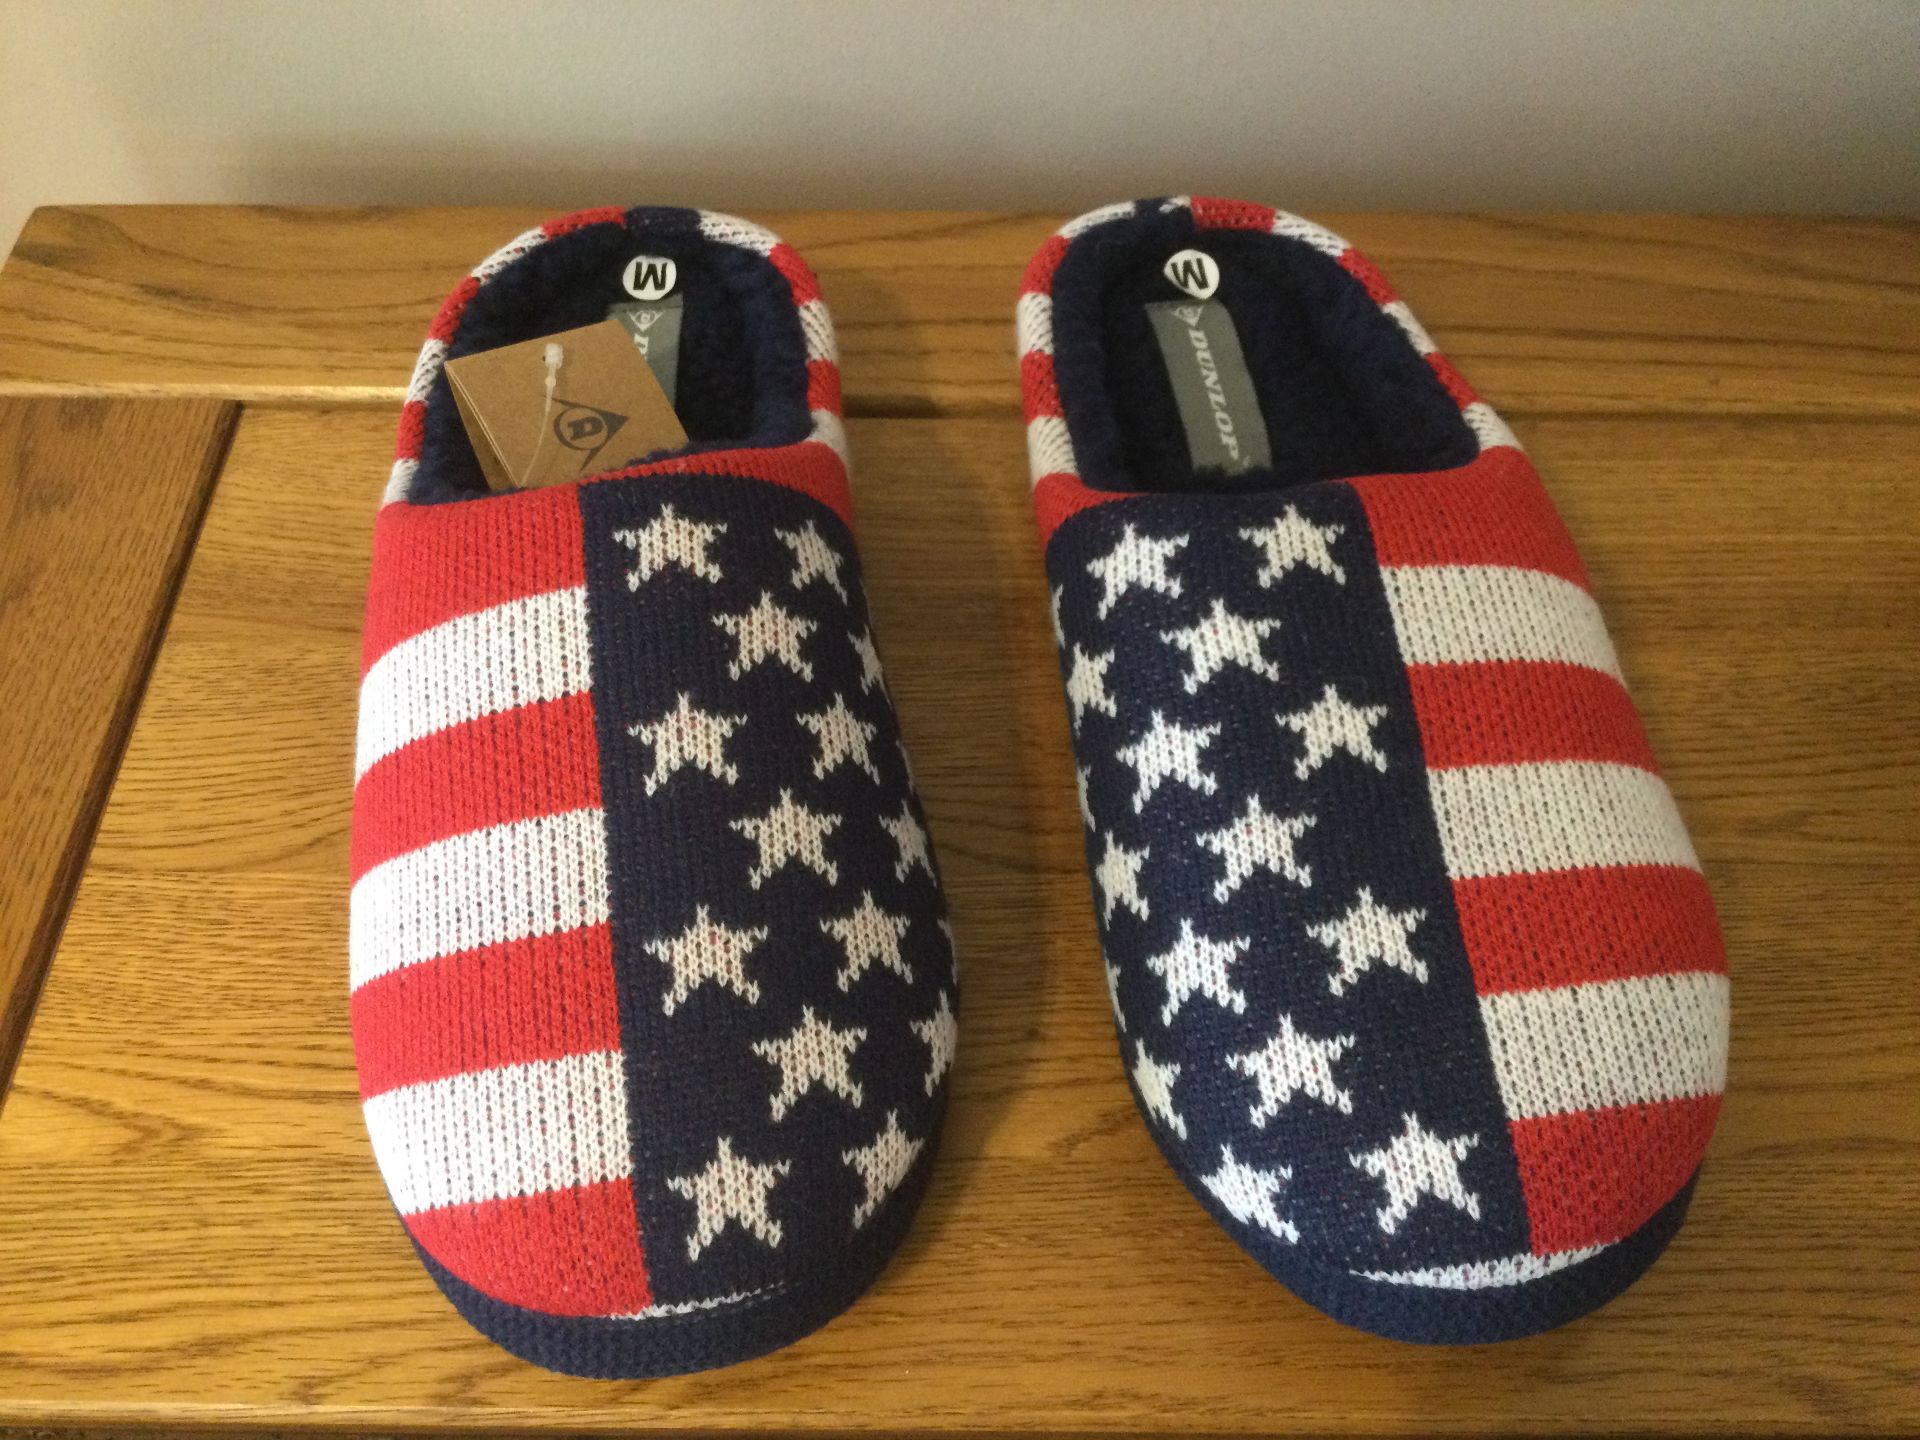 Job Lot 10 x Pairs Men's Dunlop, “USA Stars and Stripes” Memory Foam, Mule Slippers, Size M (8/9) - Image 4 of 7